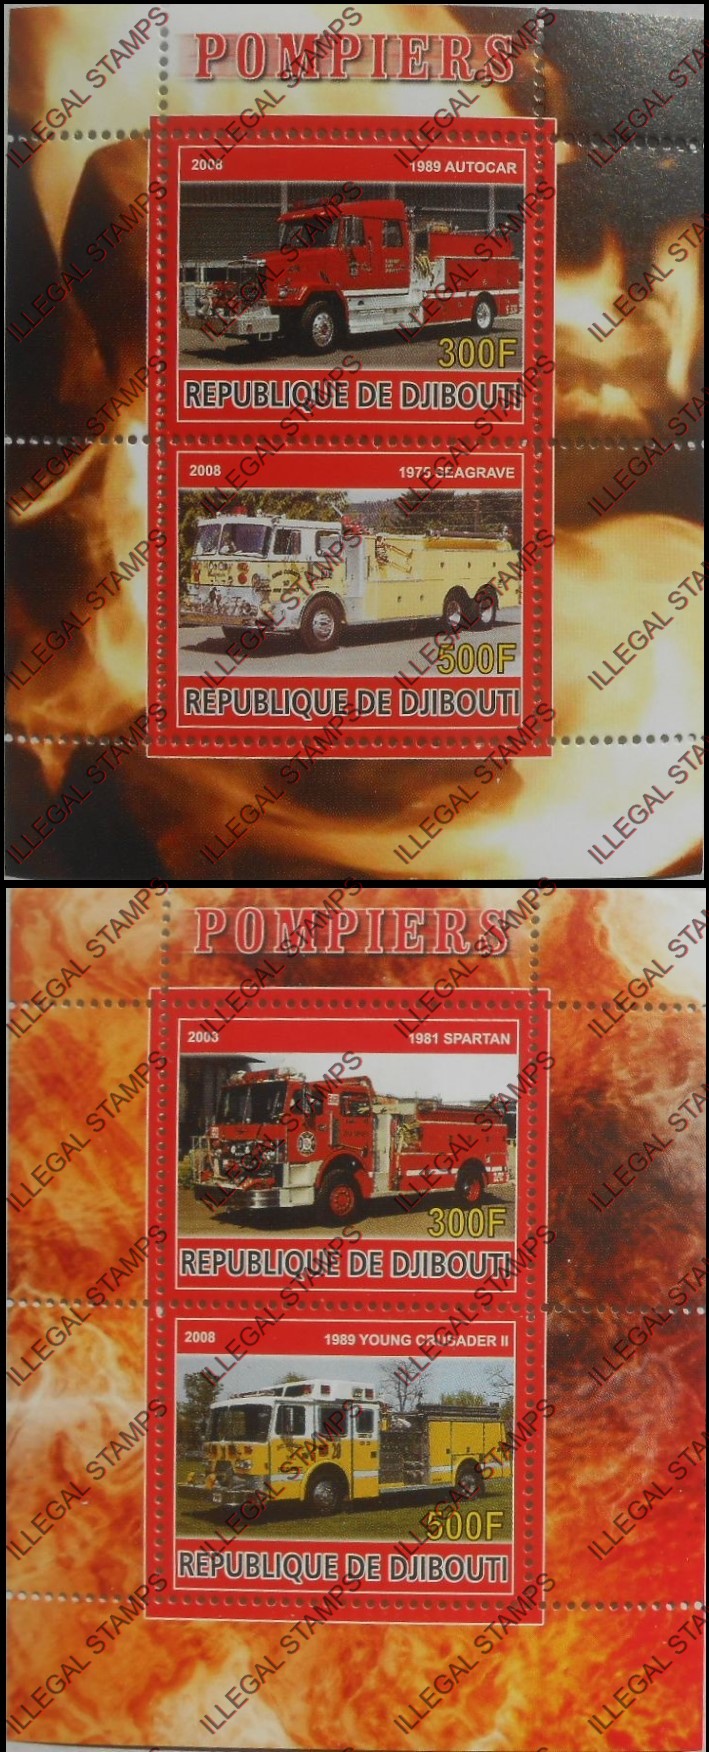 Djibouti 2008 Fire Engines Illegal Stamp Souvenir Sheets of 2